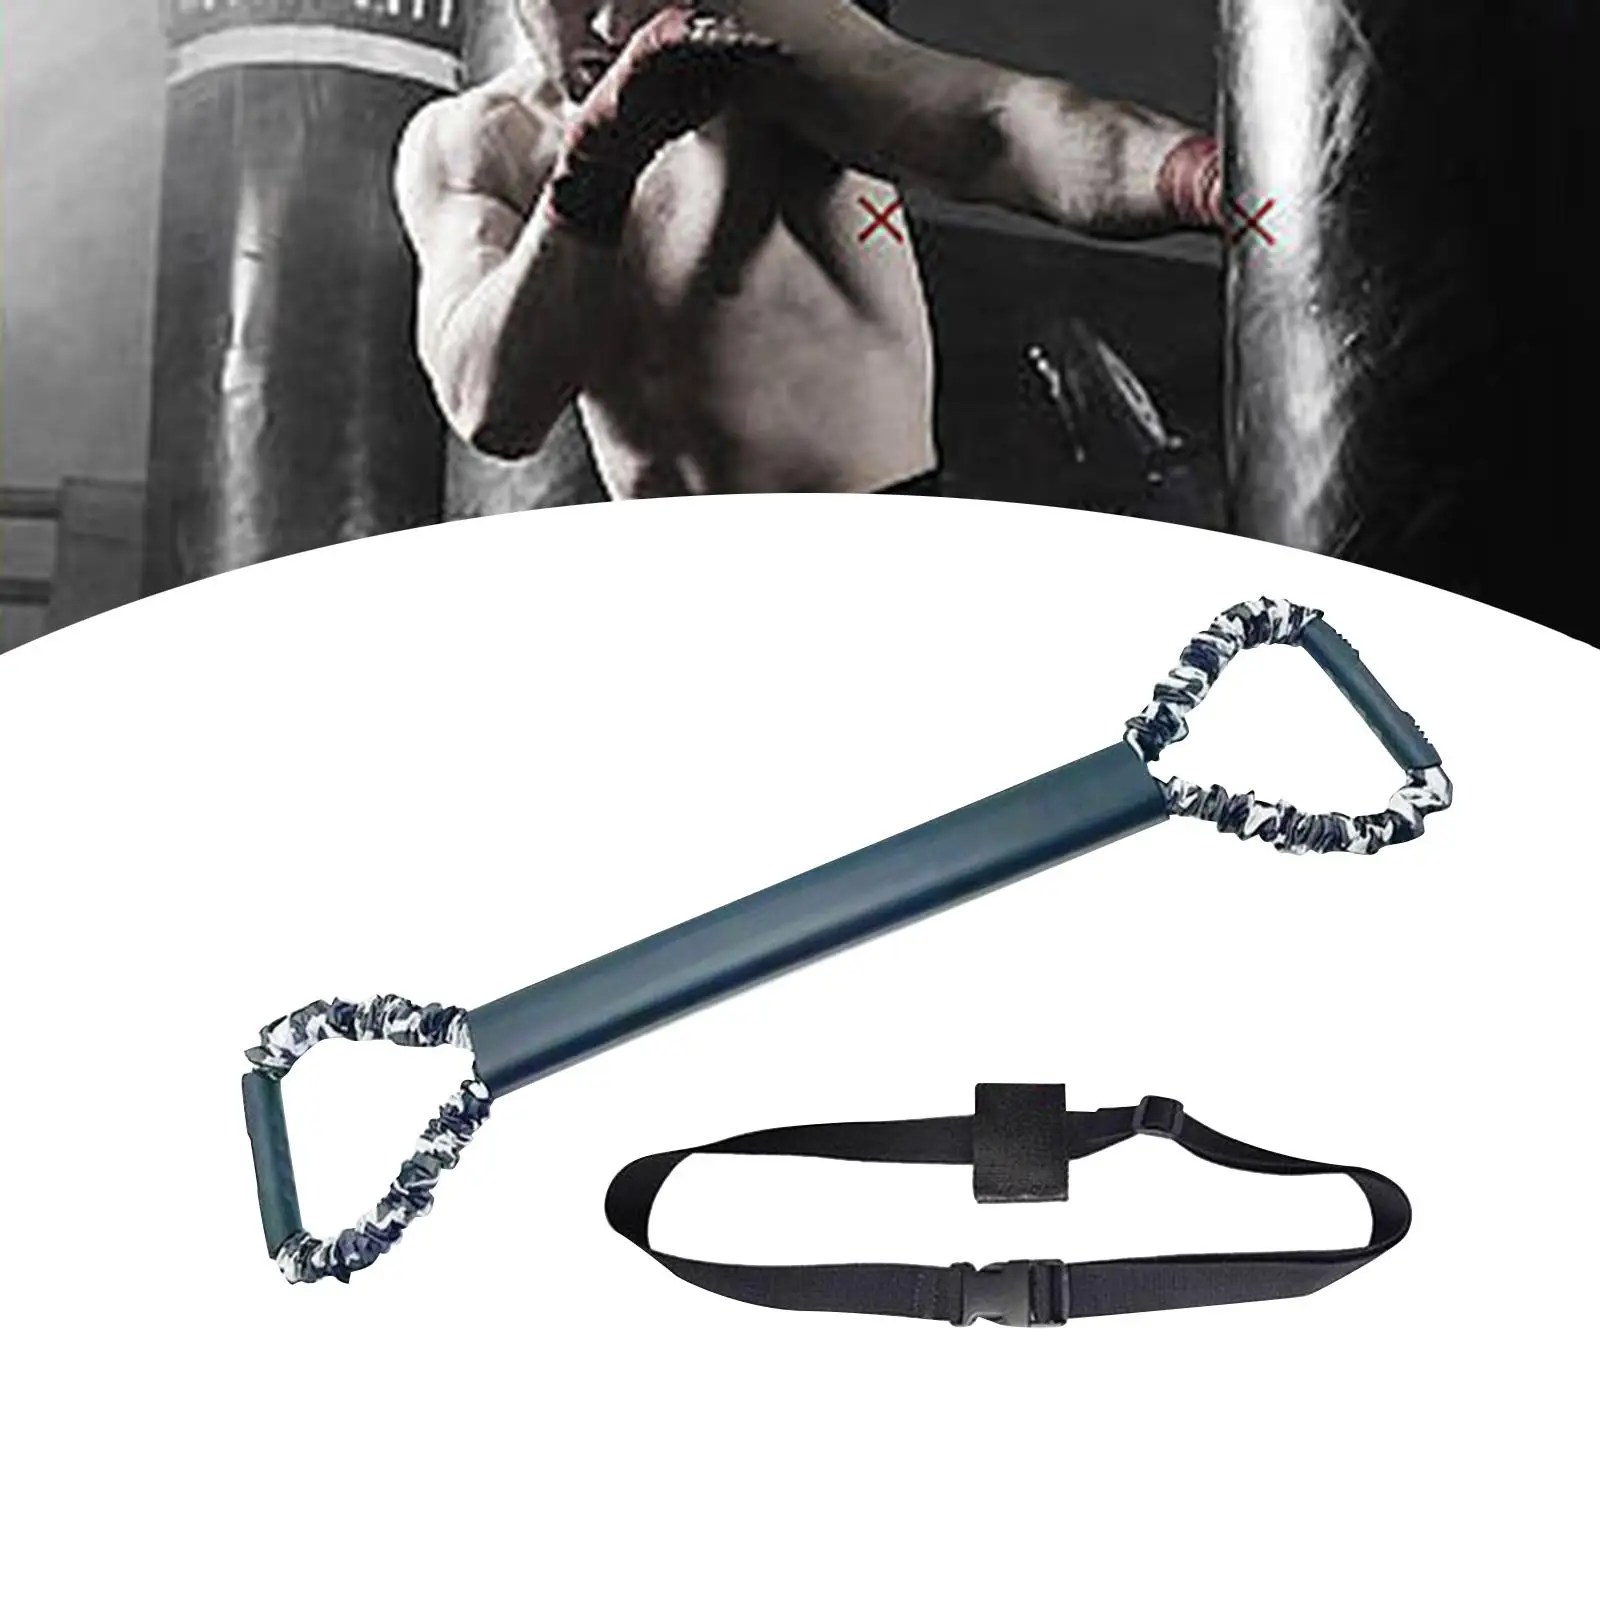 Boxing Resistance Band Workout Equipment Strength Training Exercise Band Pulling Rope for Shadow Boxing Mma Legs Arm Women Men